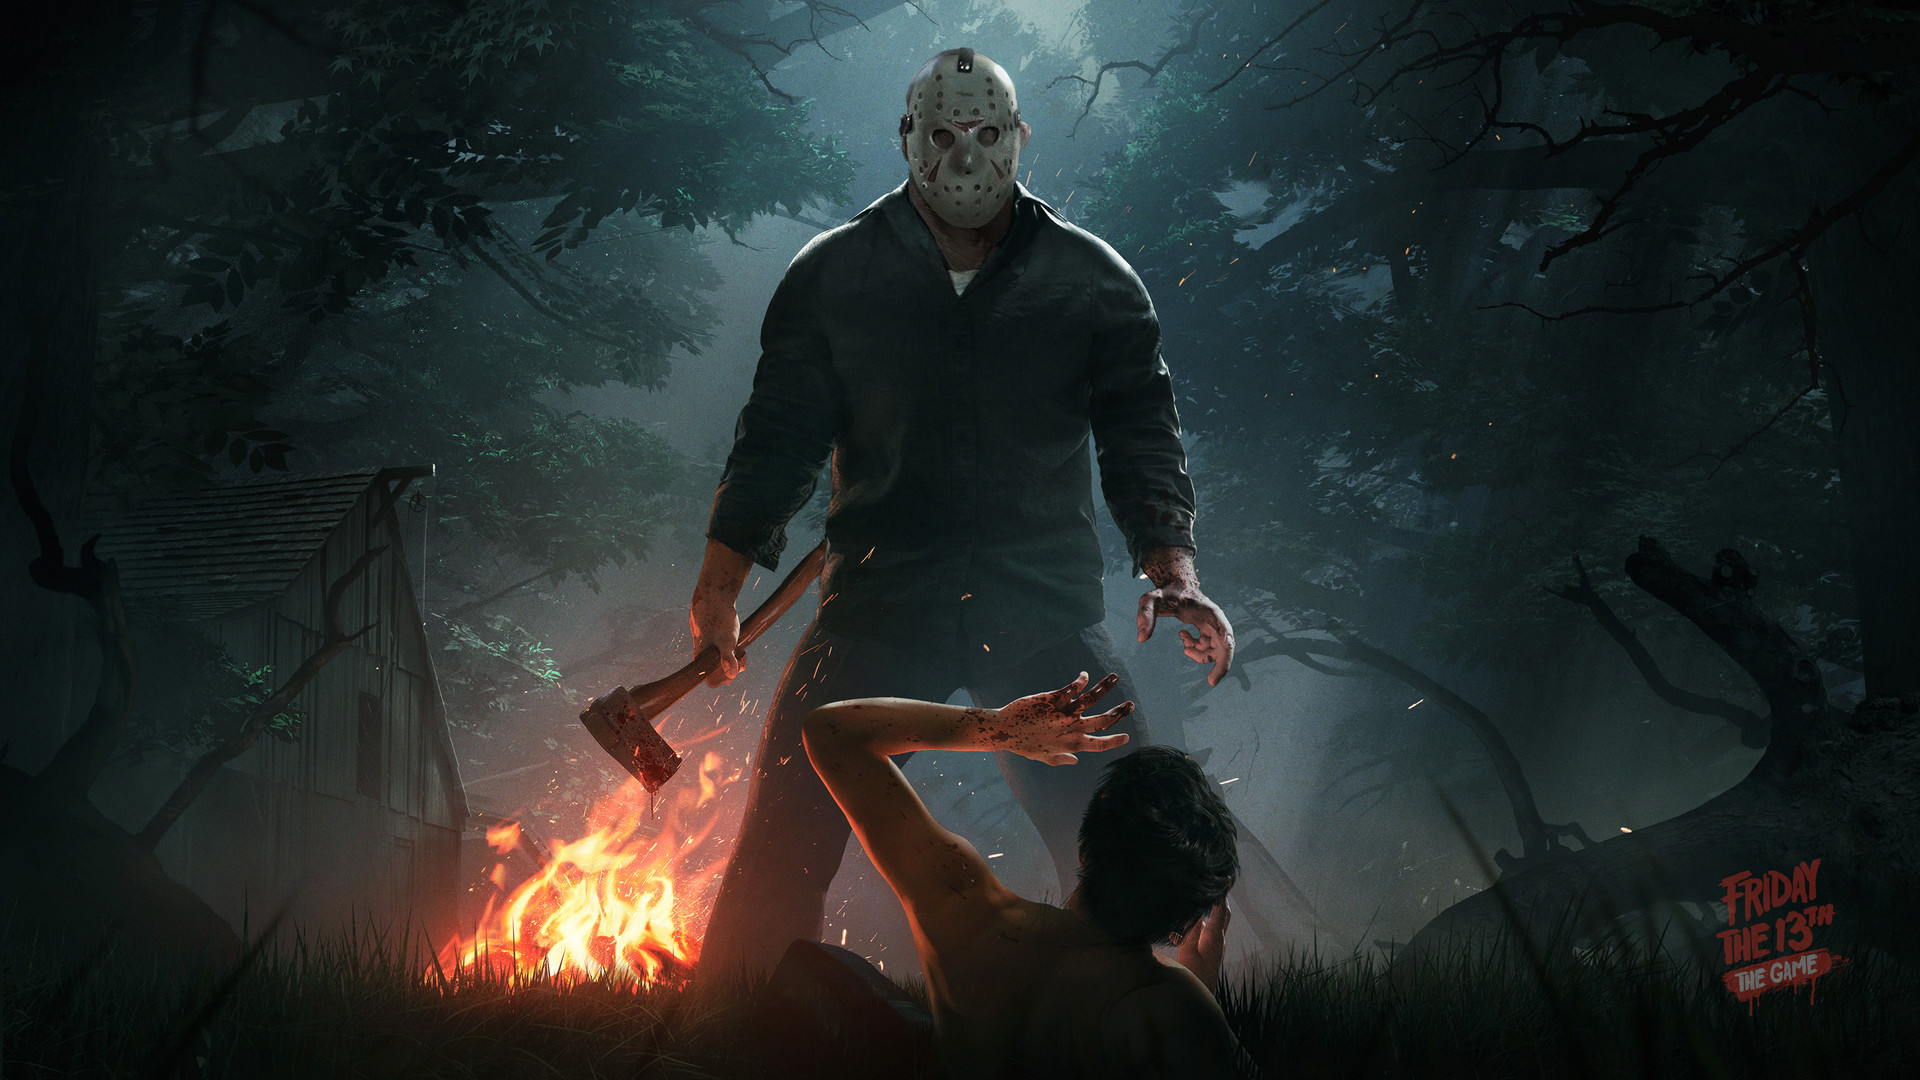 1920x1080 Jason Voorhees Wallpaper from Friday the 13th: The Game